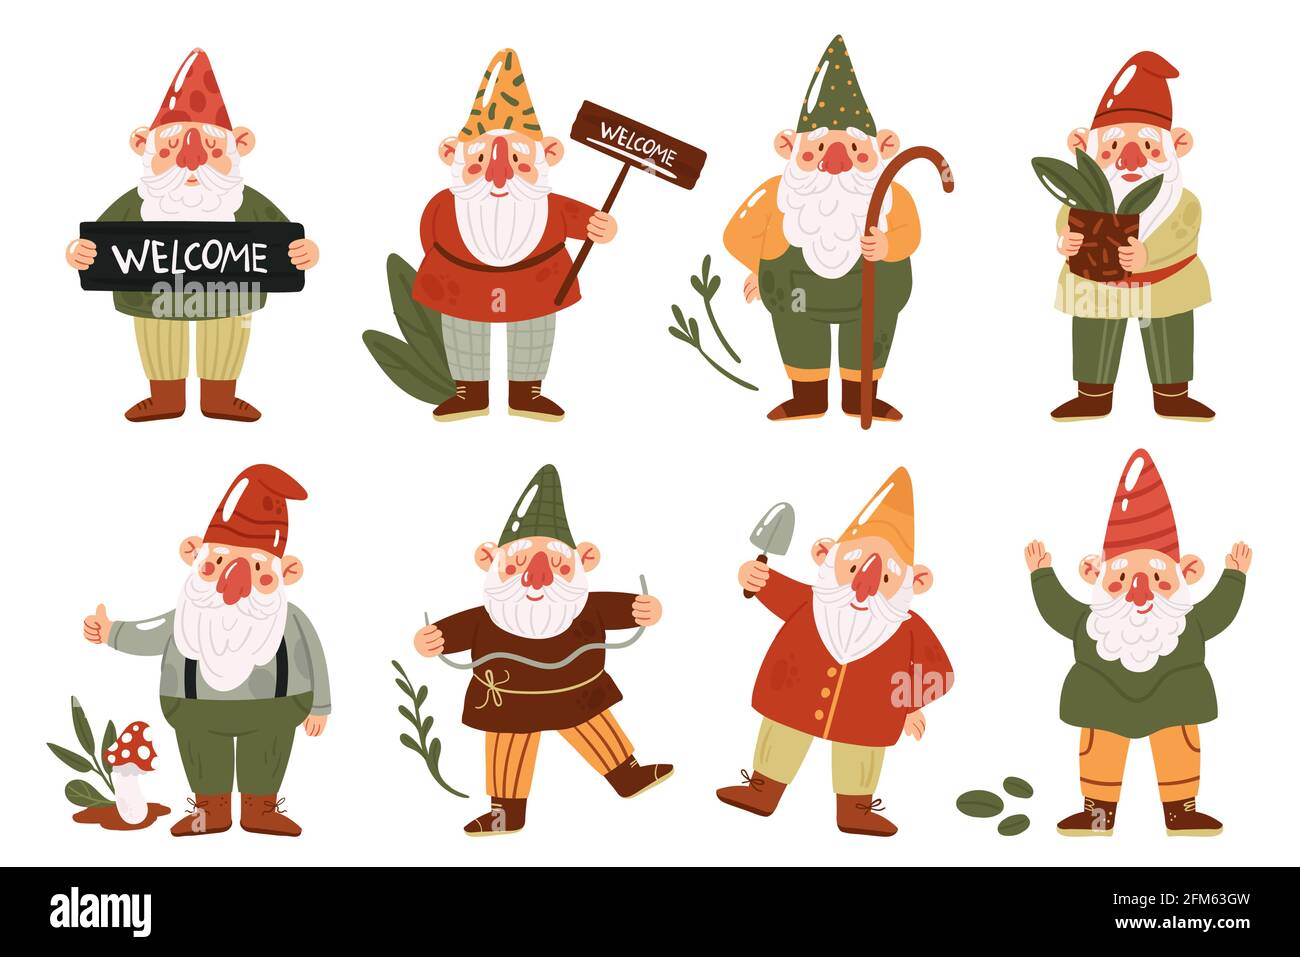 Cute garden gnomes or dwarfs vector illustration set. Cartoon funny myth fairytale characters with hats collection, small gnomes or trolls gardening, holding mushroom, plant pot isolated on white Stock Vector